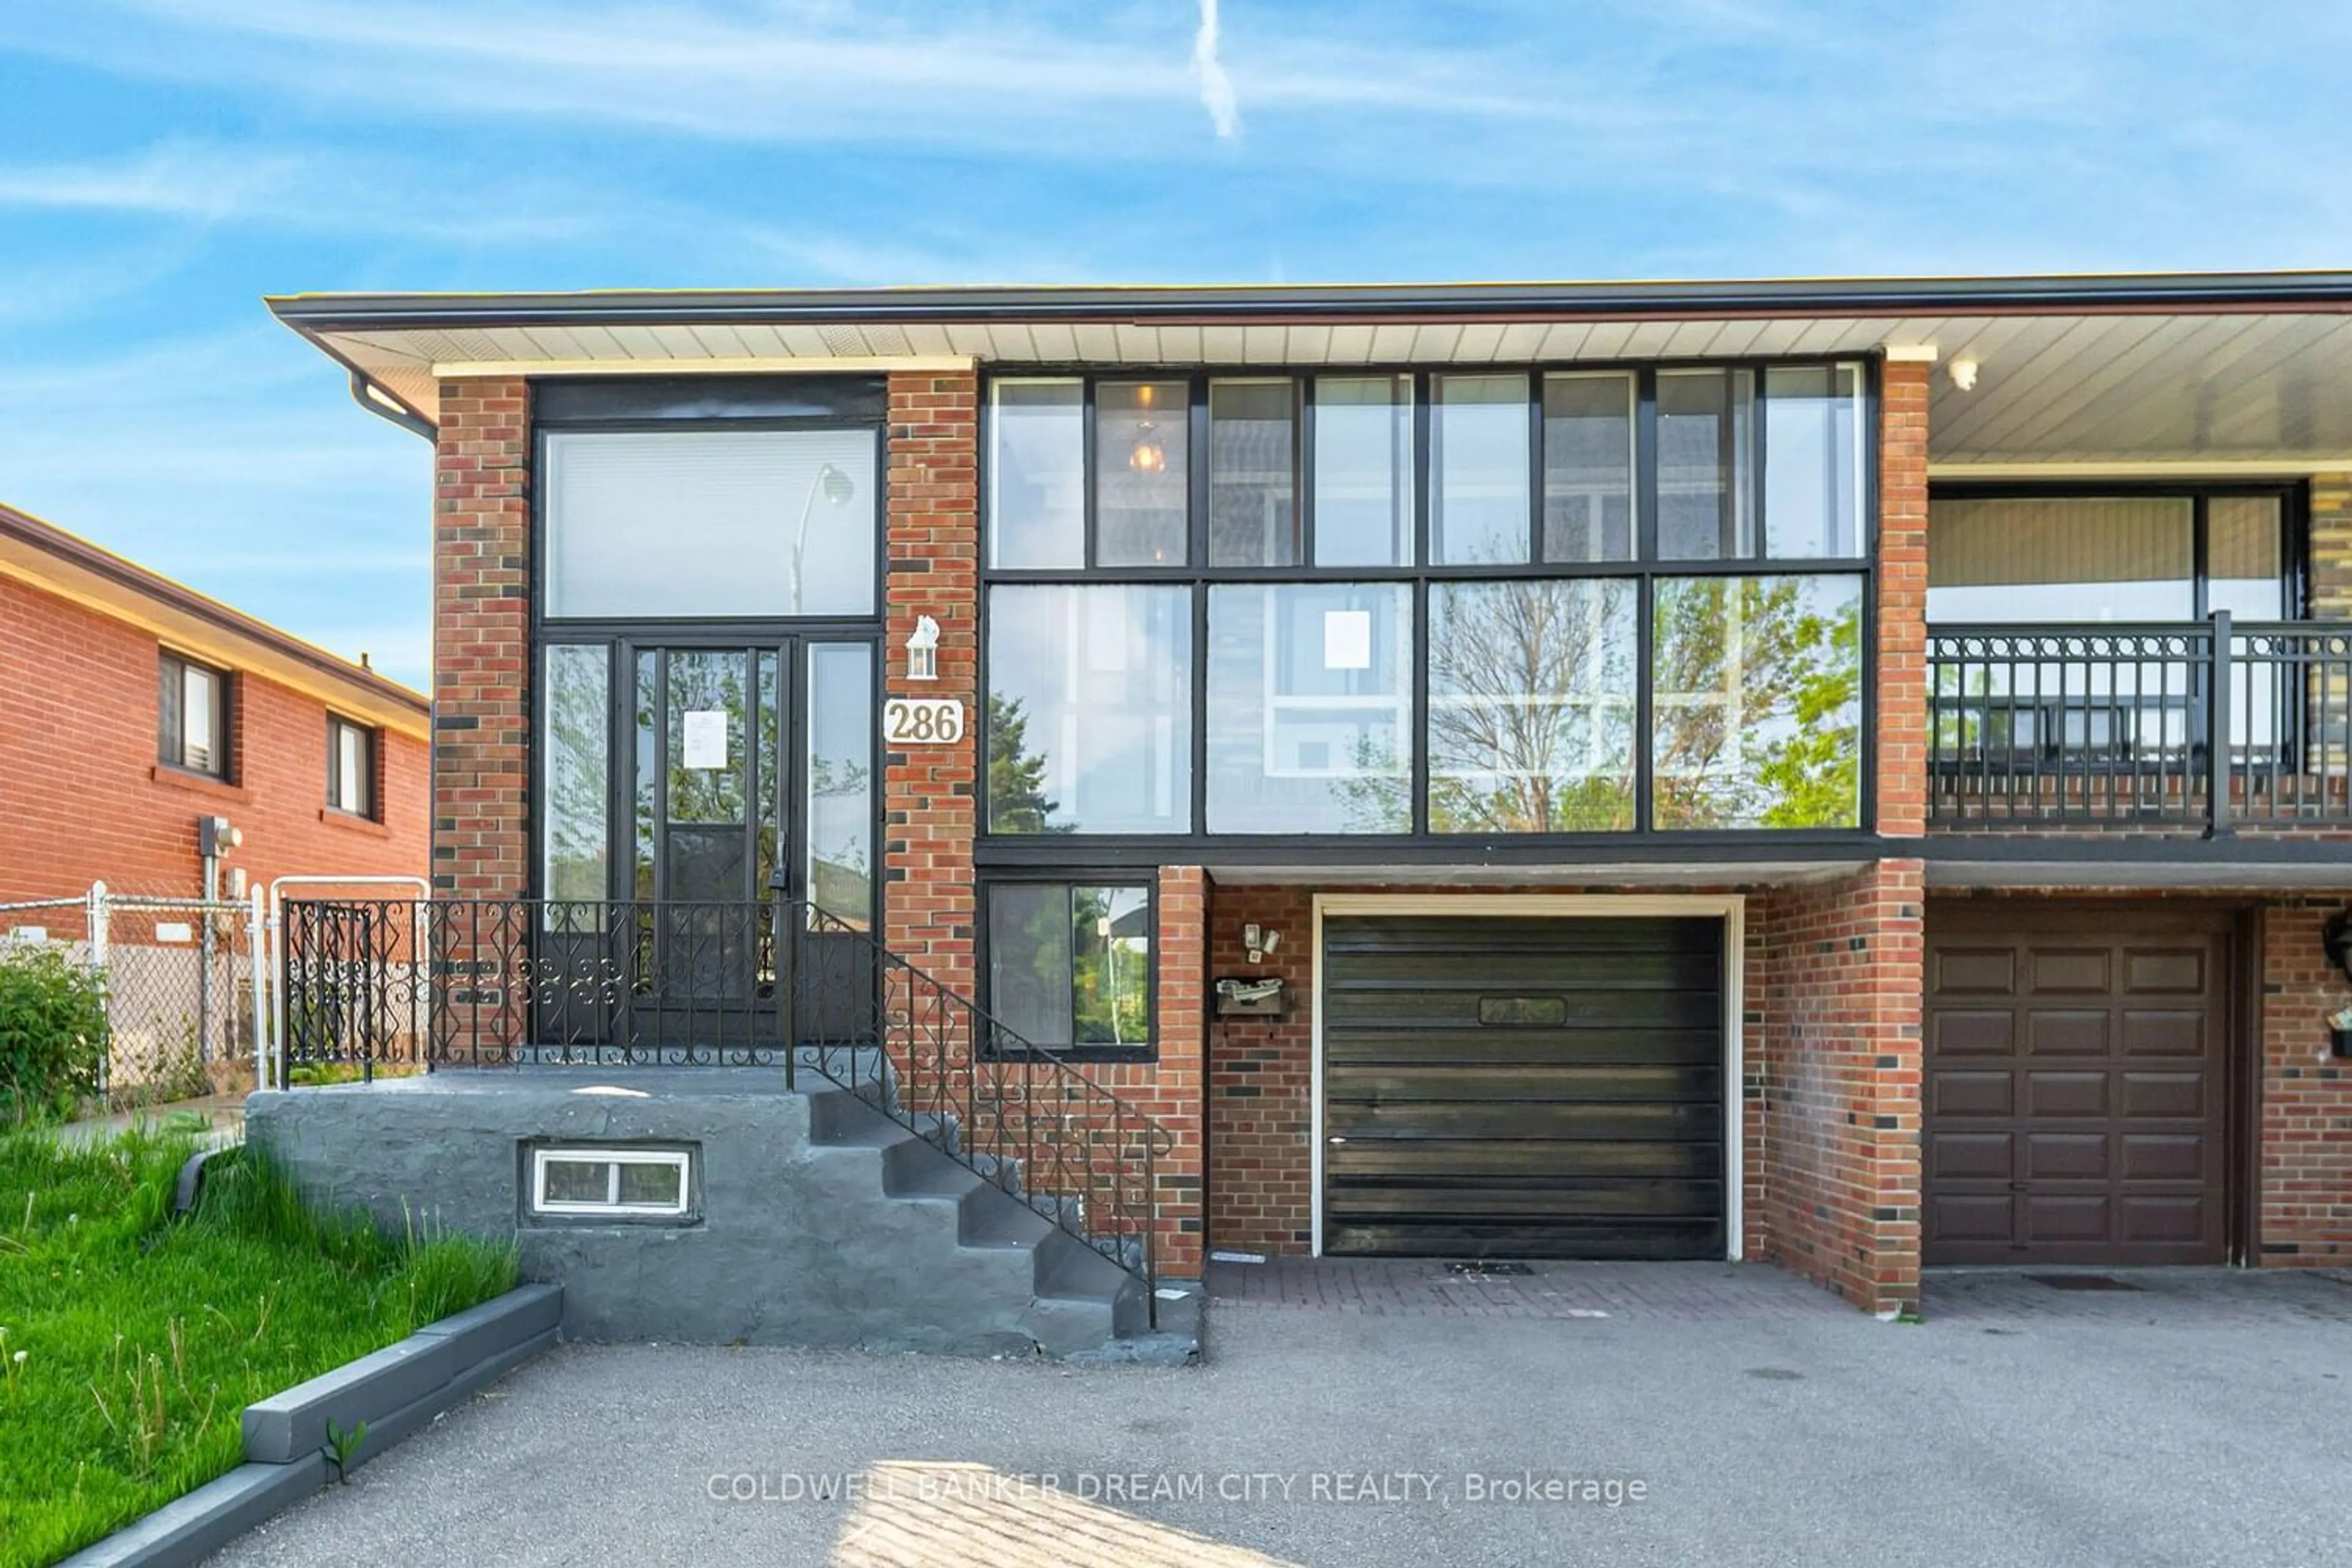 Home with brick exterior material for 286 Hullmar Dr, Toronto Ontario M3N 2G1